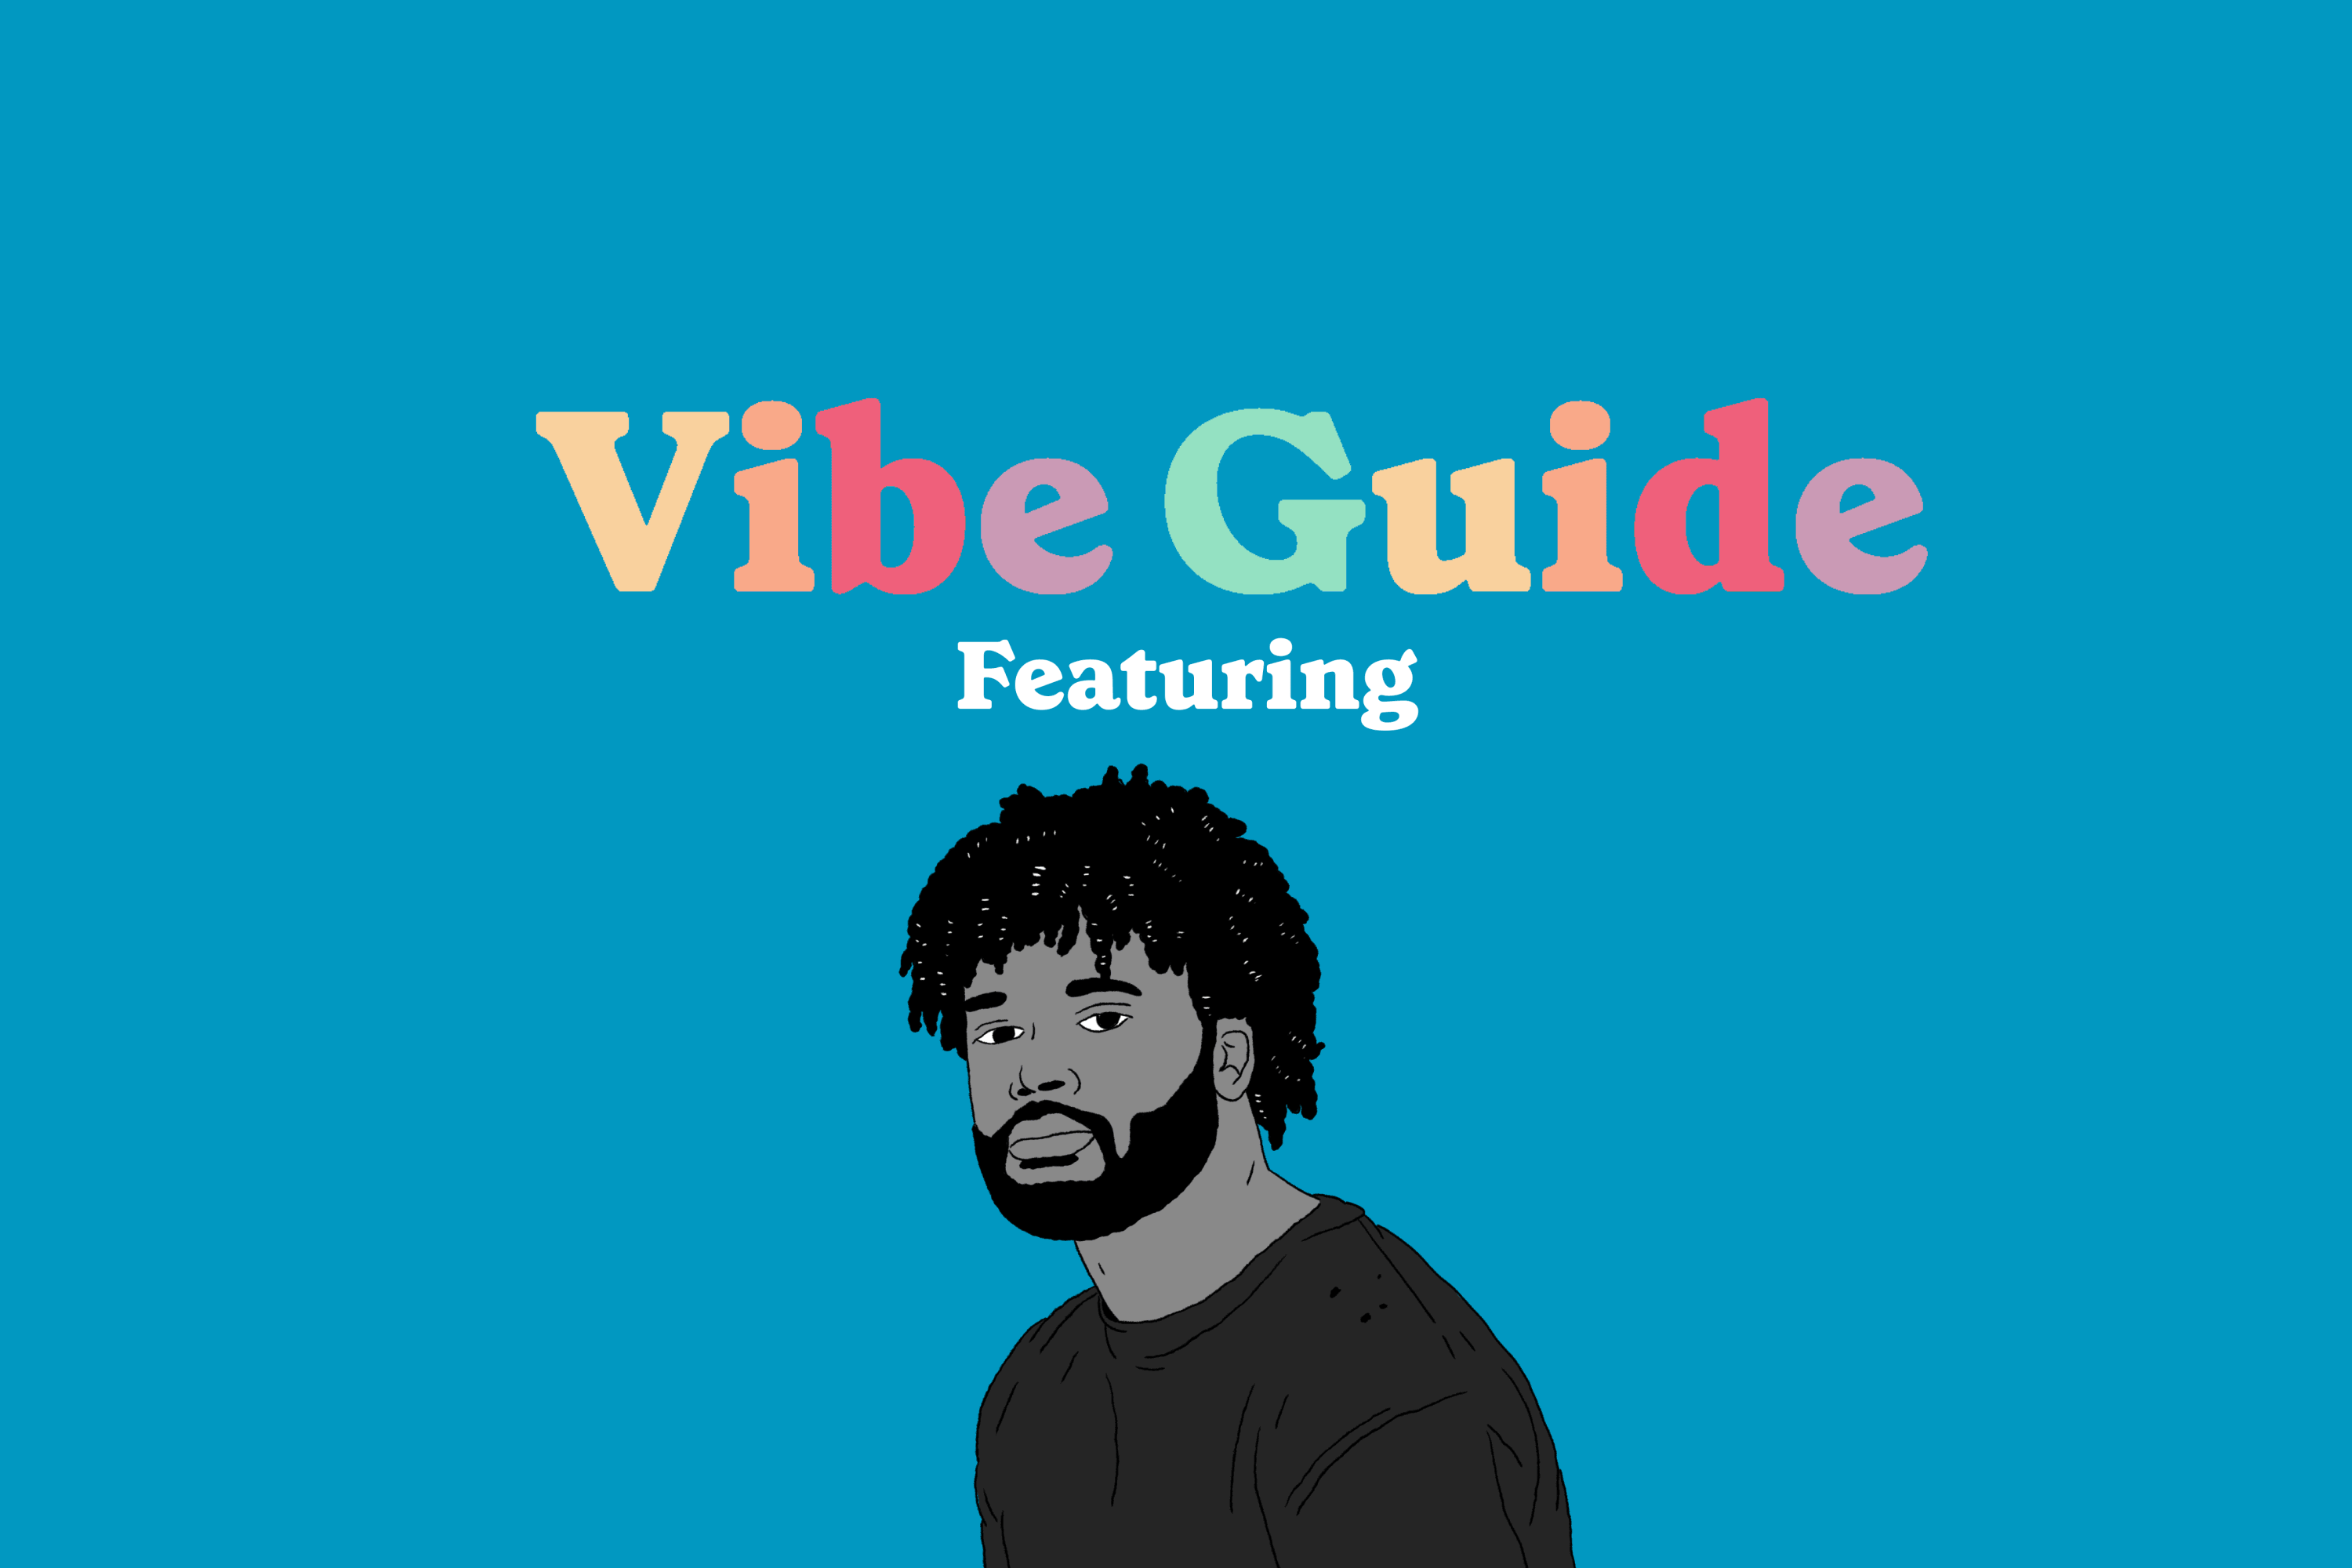 An illustration of AJ Girard for the Vibe Guide